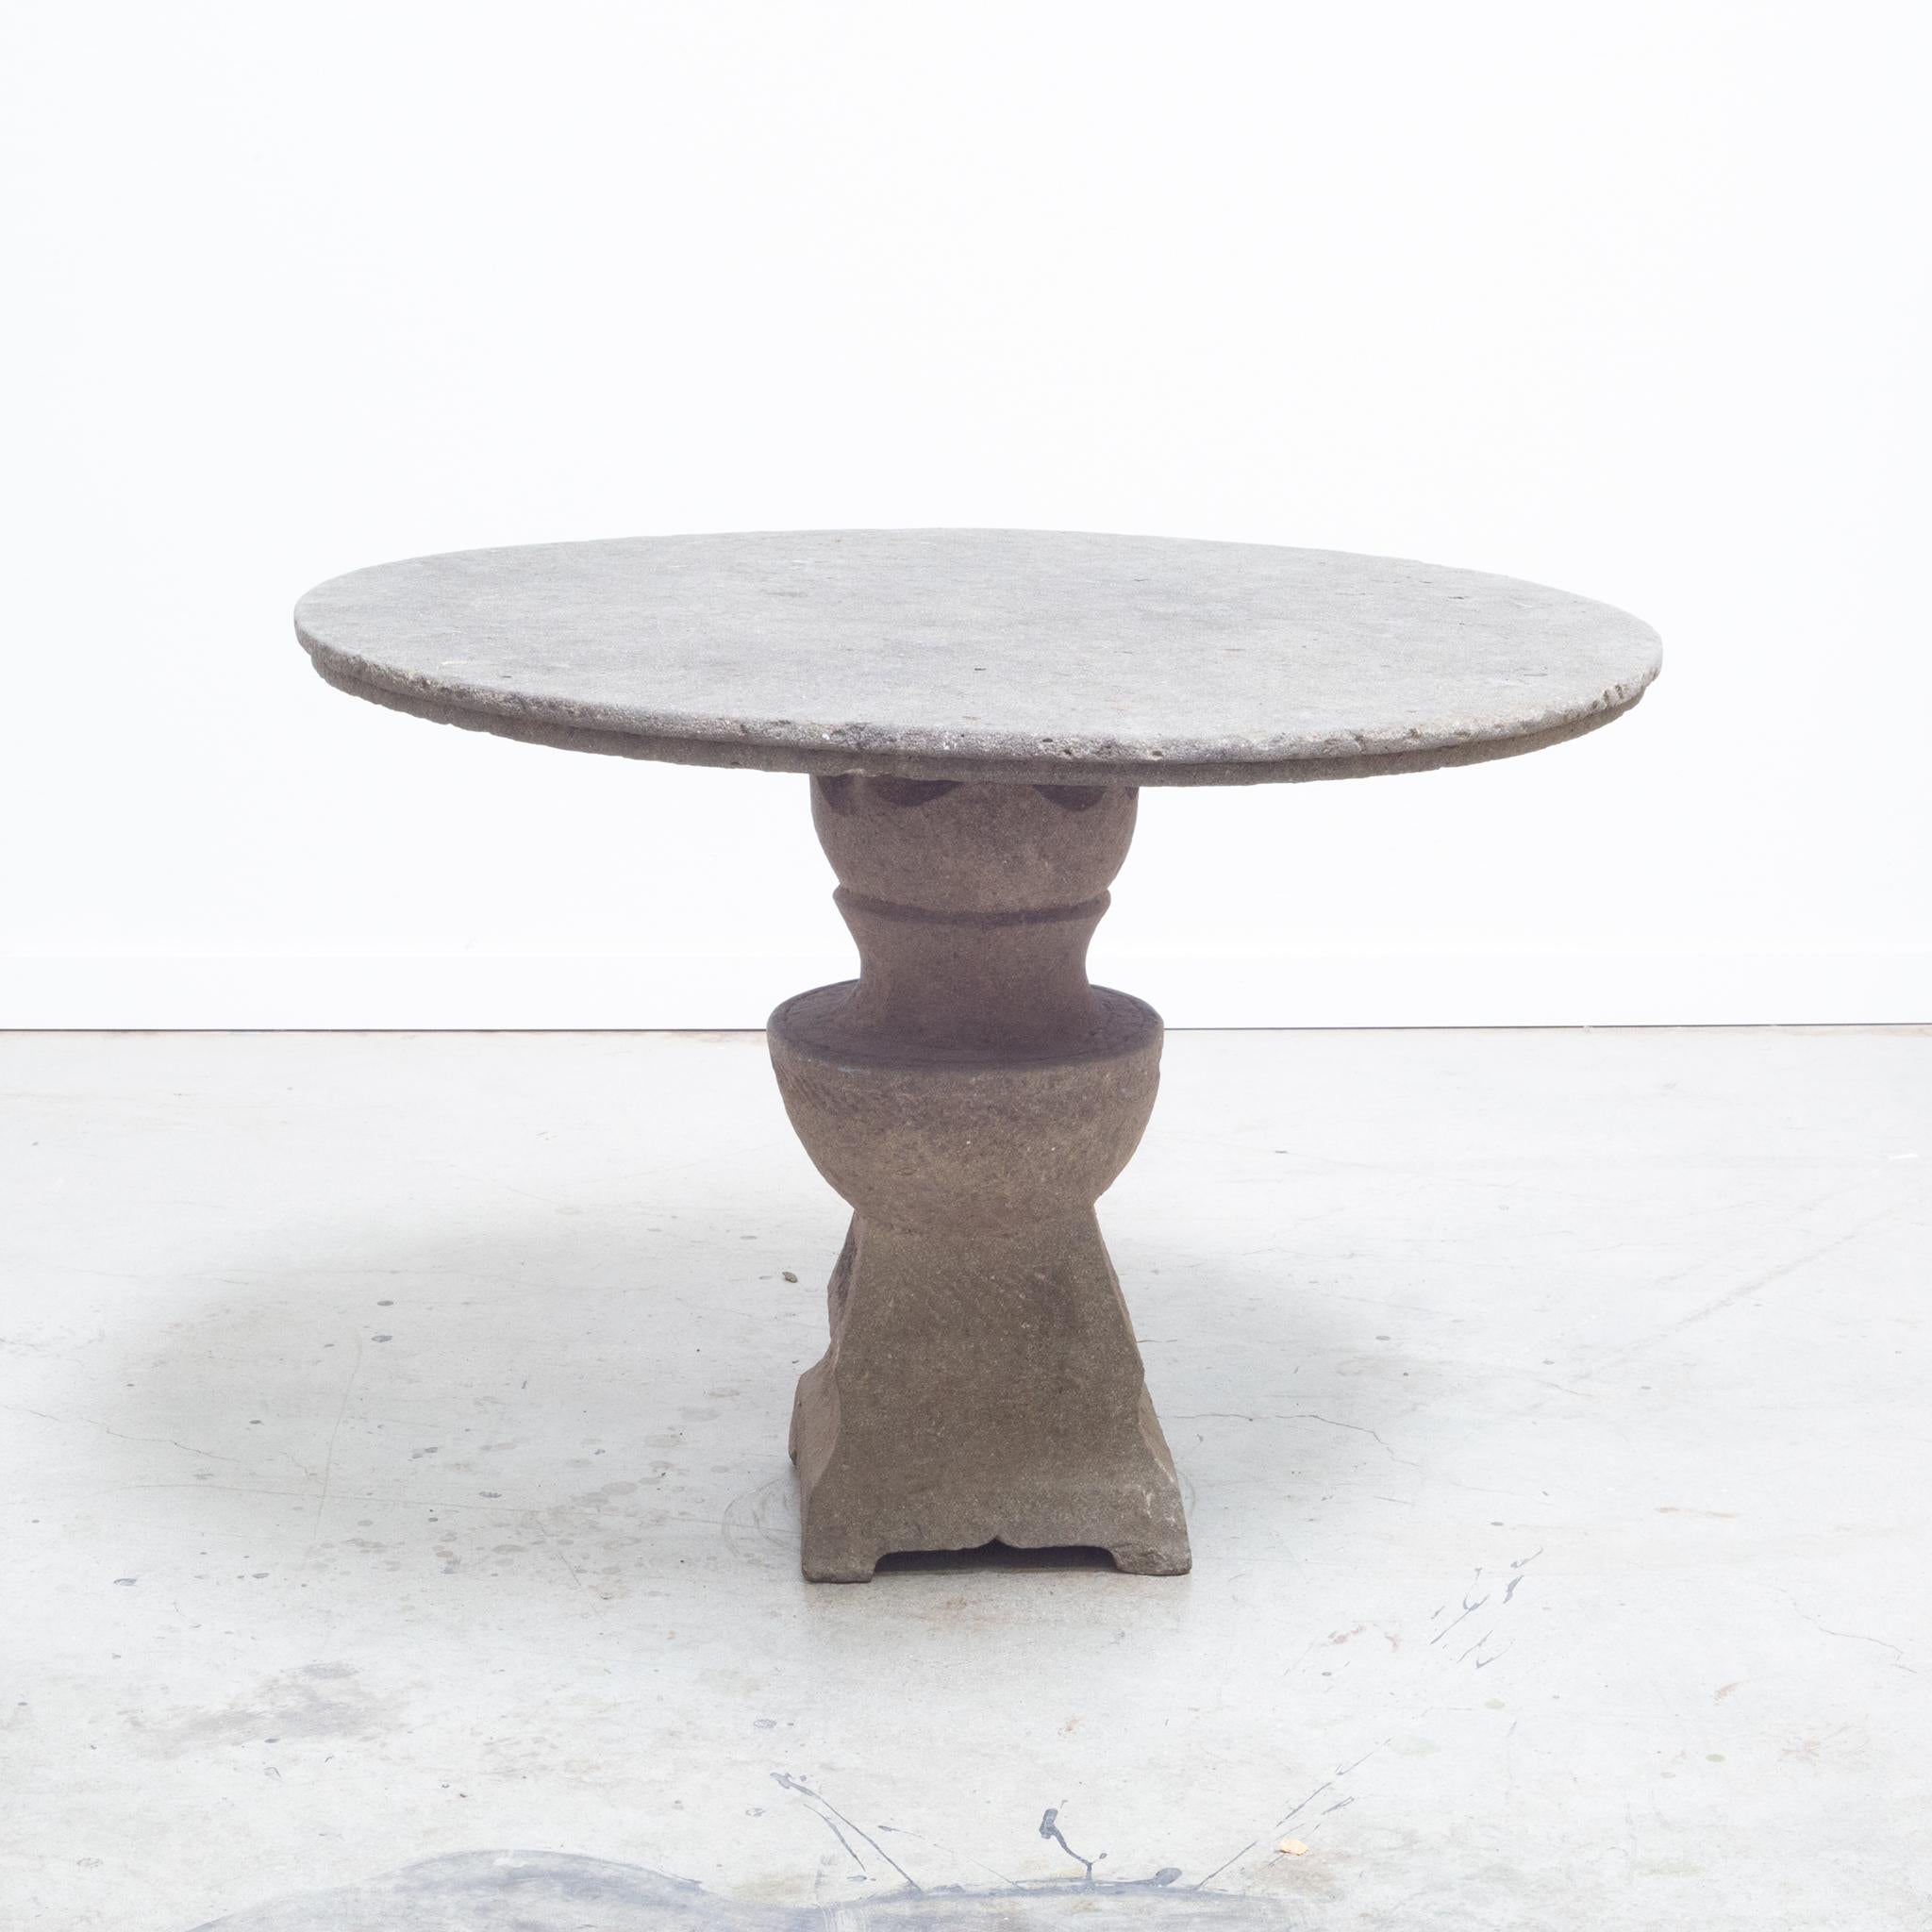 Early 20th C. French Cast Concrete Patio Garden Table c. 1910 1